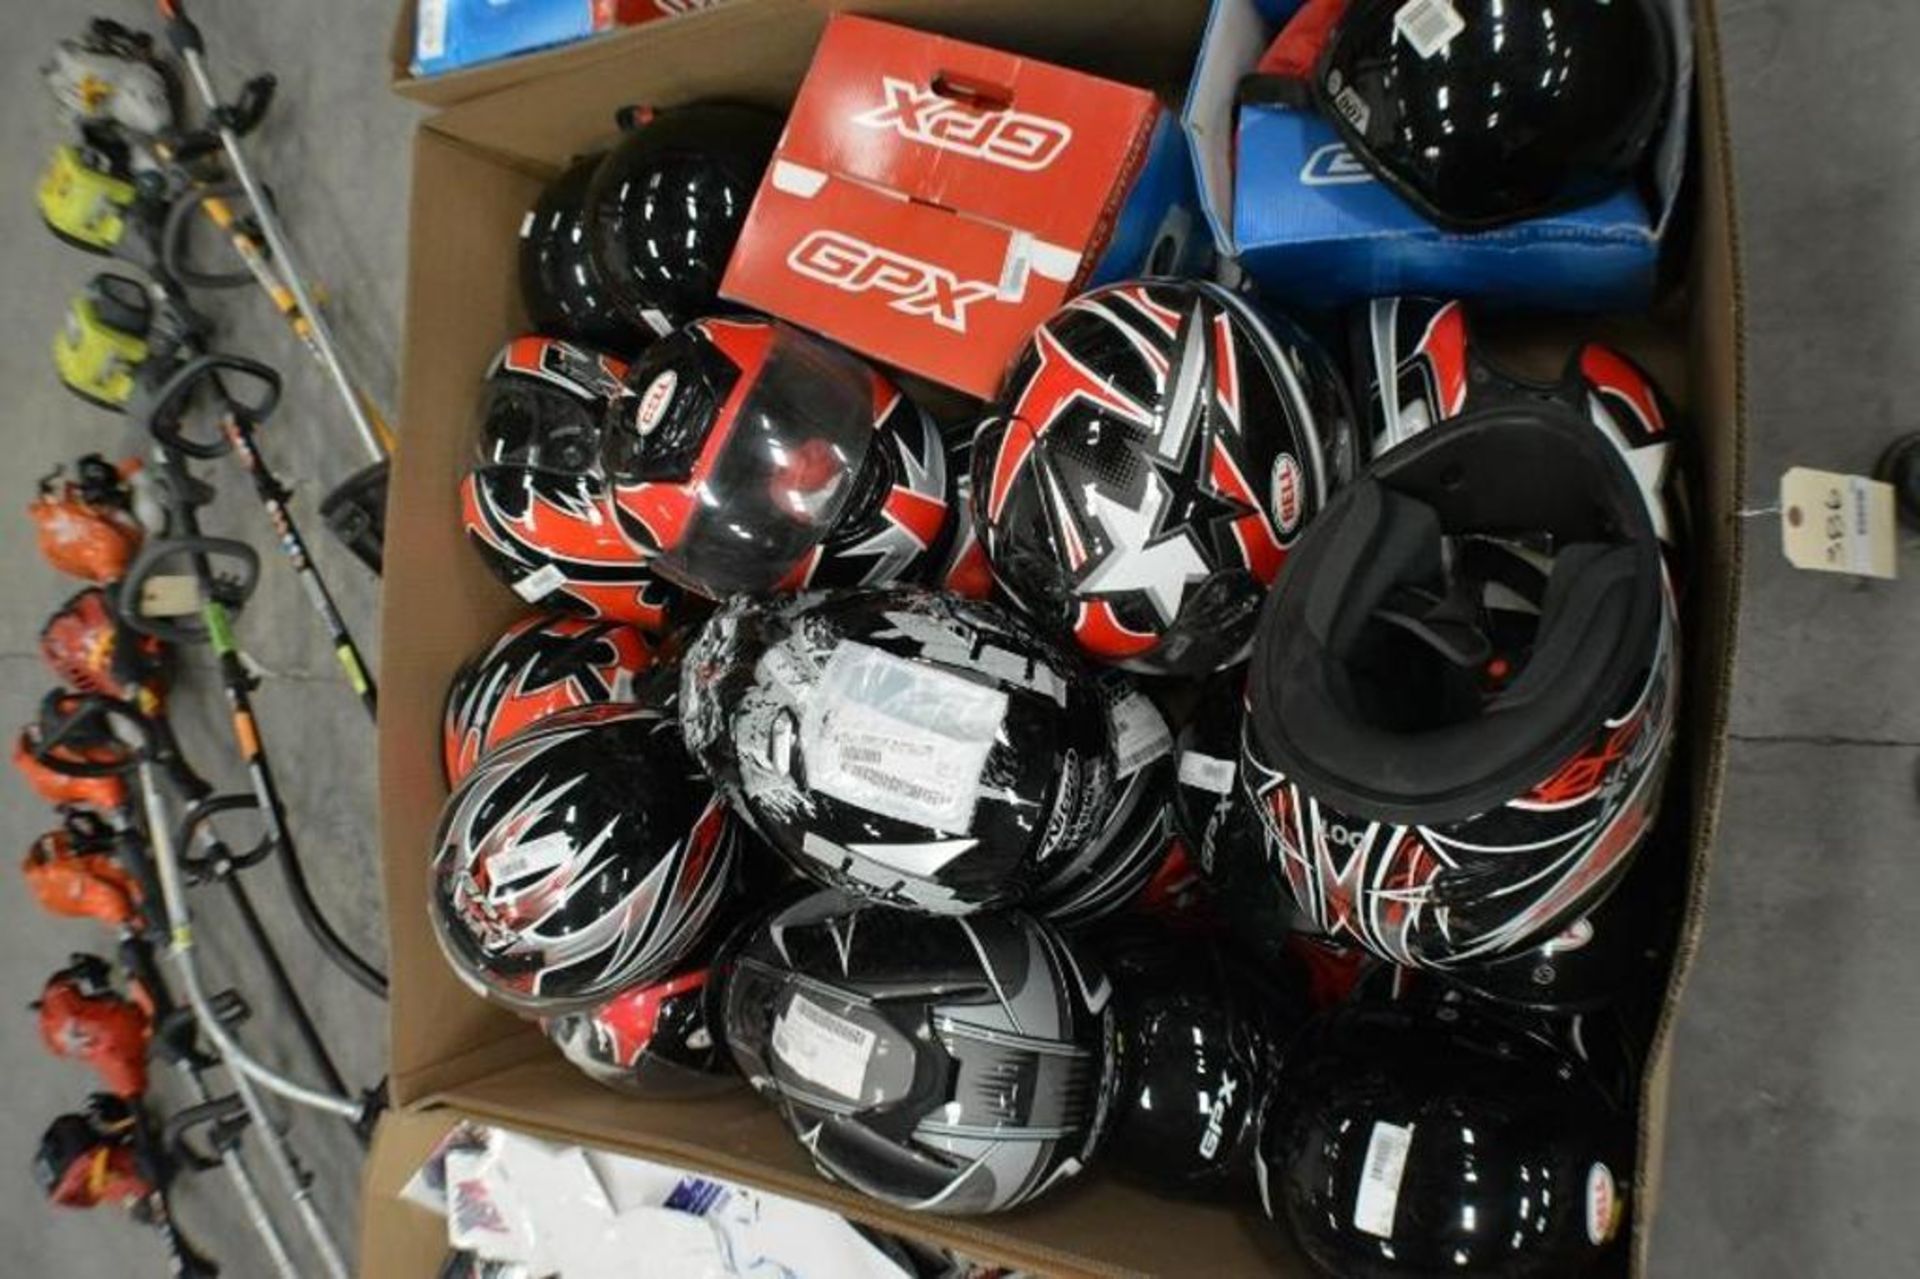 Motorcycle Helmets. Assorted Sizes by GPX and Bell. Contents of Gaylord - Image 2 of 3